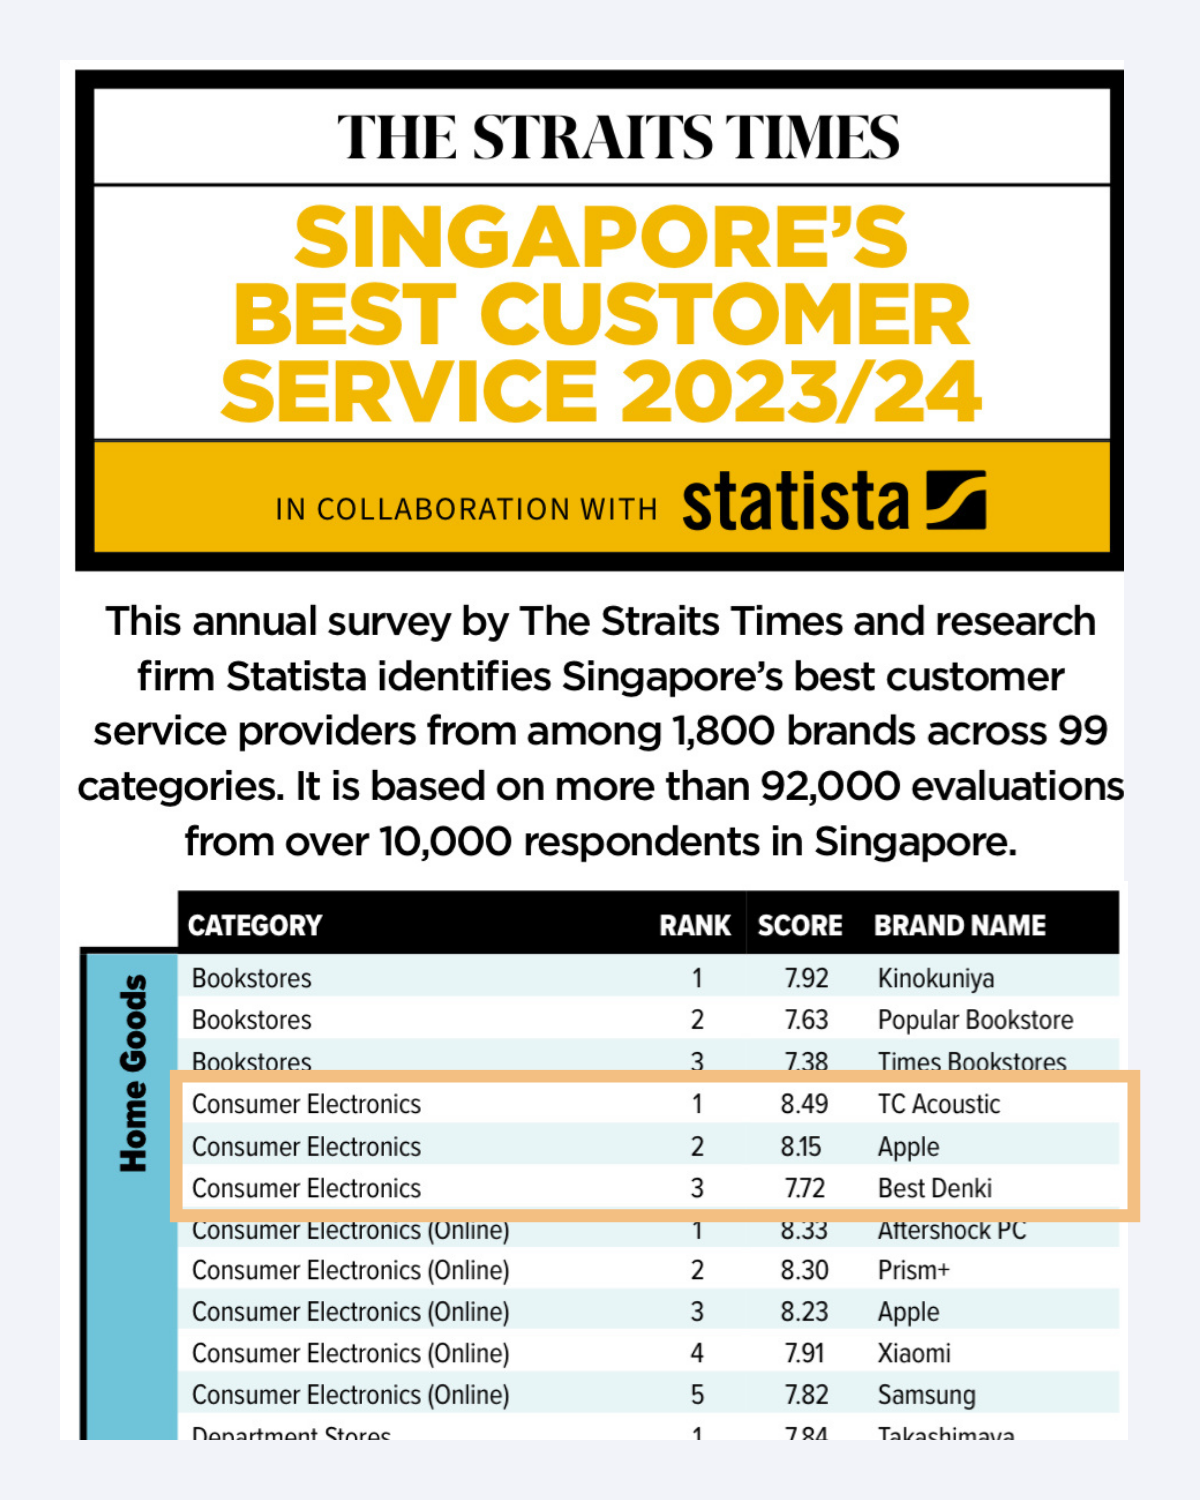 Straits Times Singapore's Best Customer Service 2023/24 - Consumer Electronics Category Table - TC Acoustic